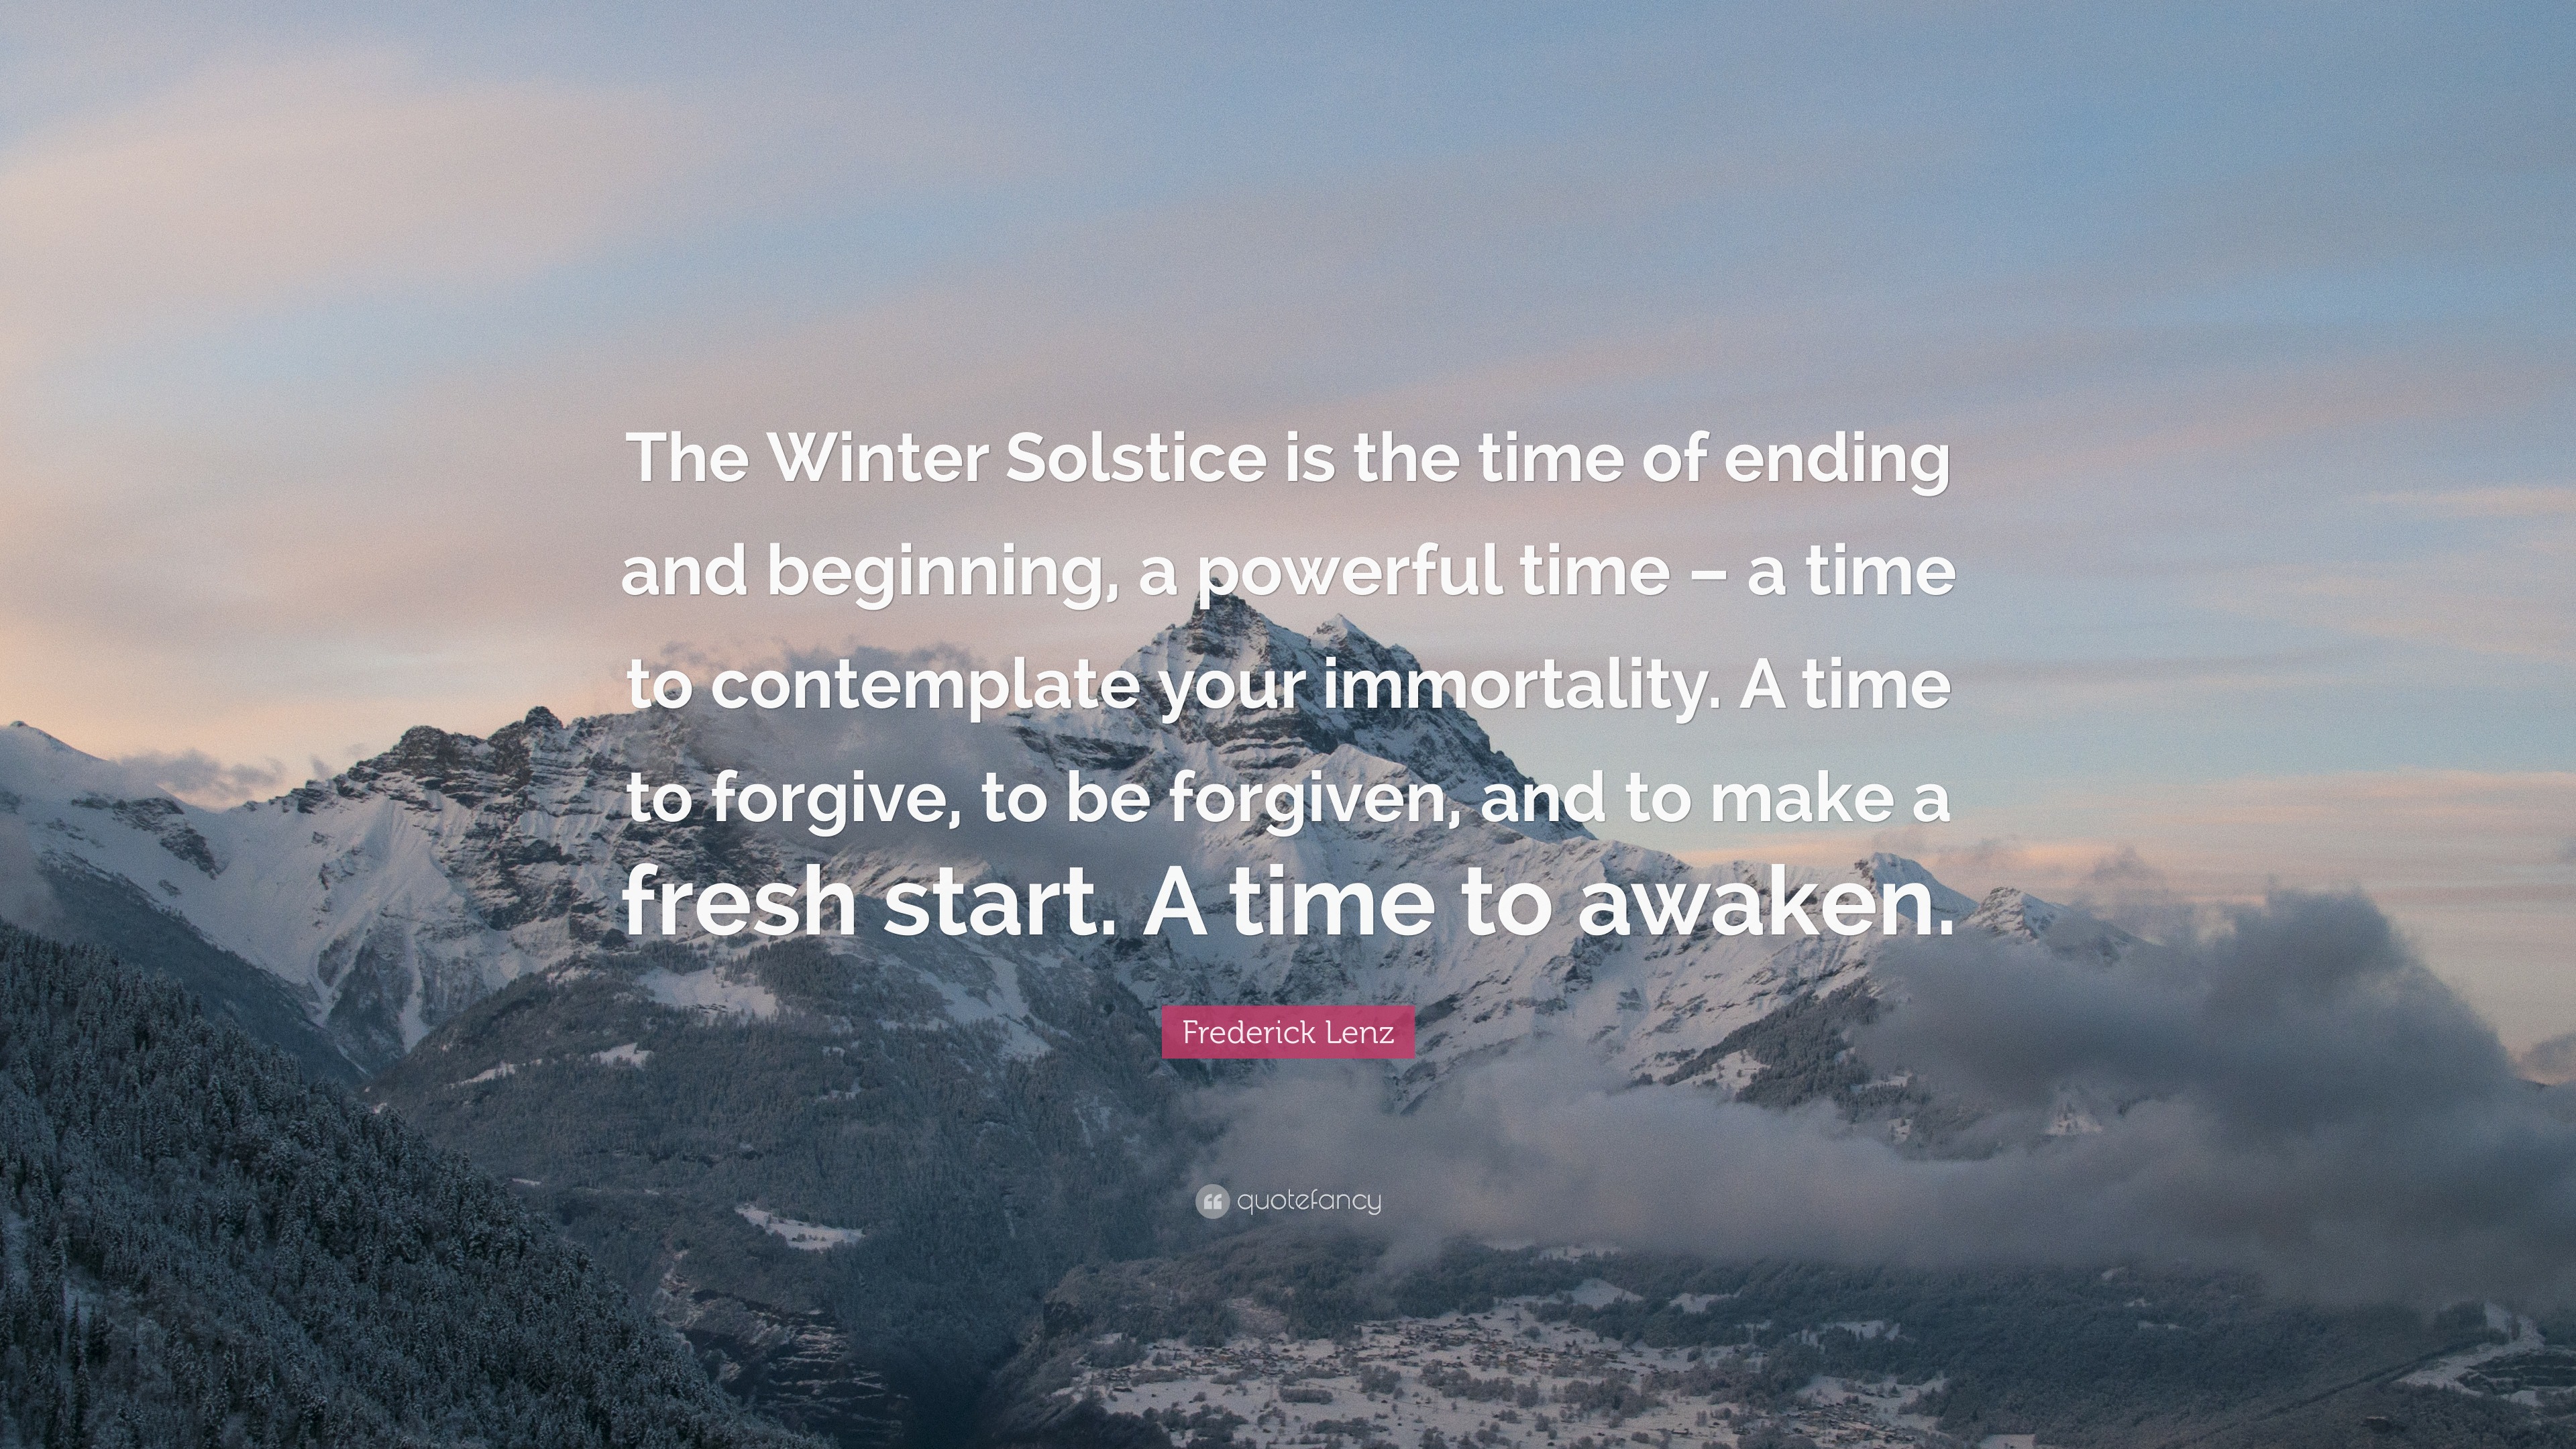 Frederick Lenz Quote: “The Winter Solstice is the time of ending and